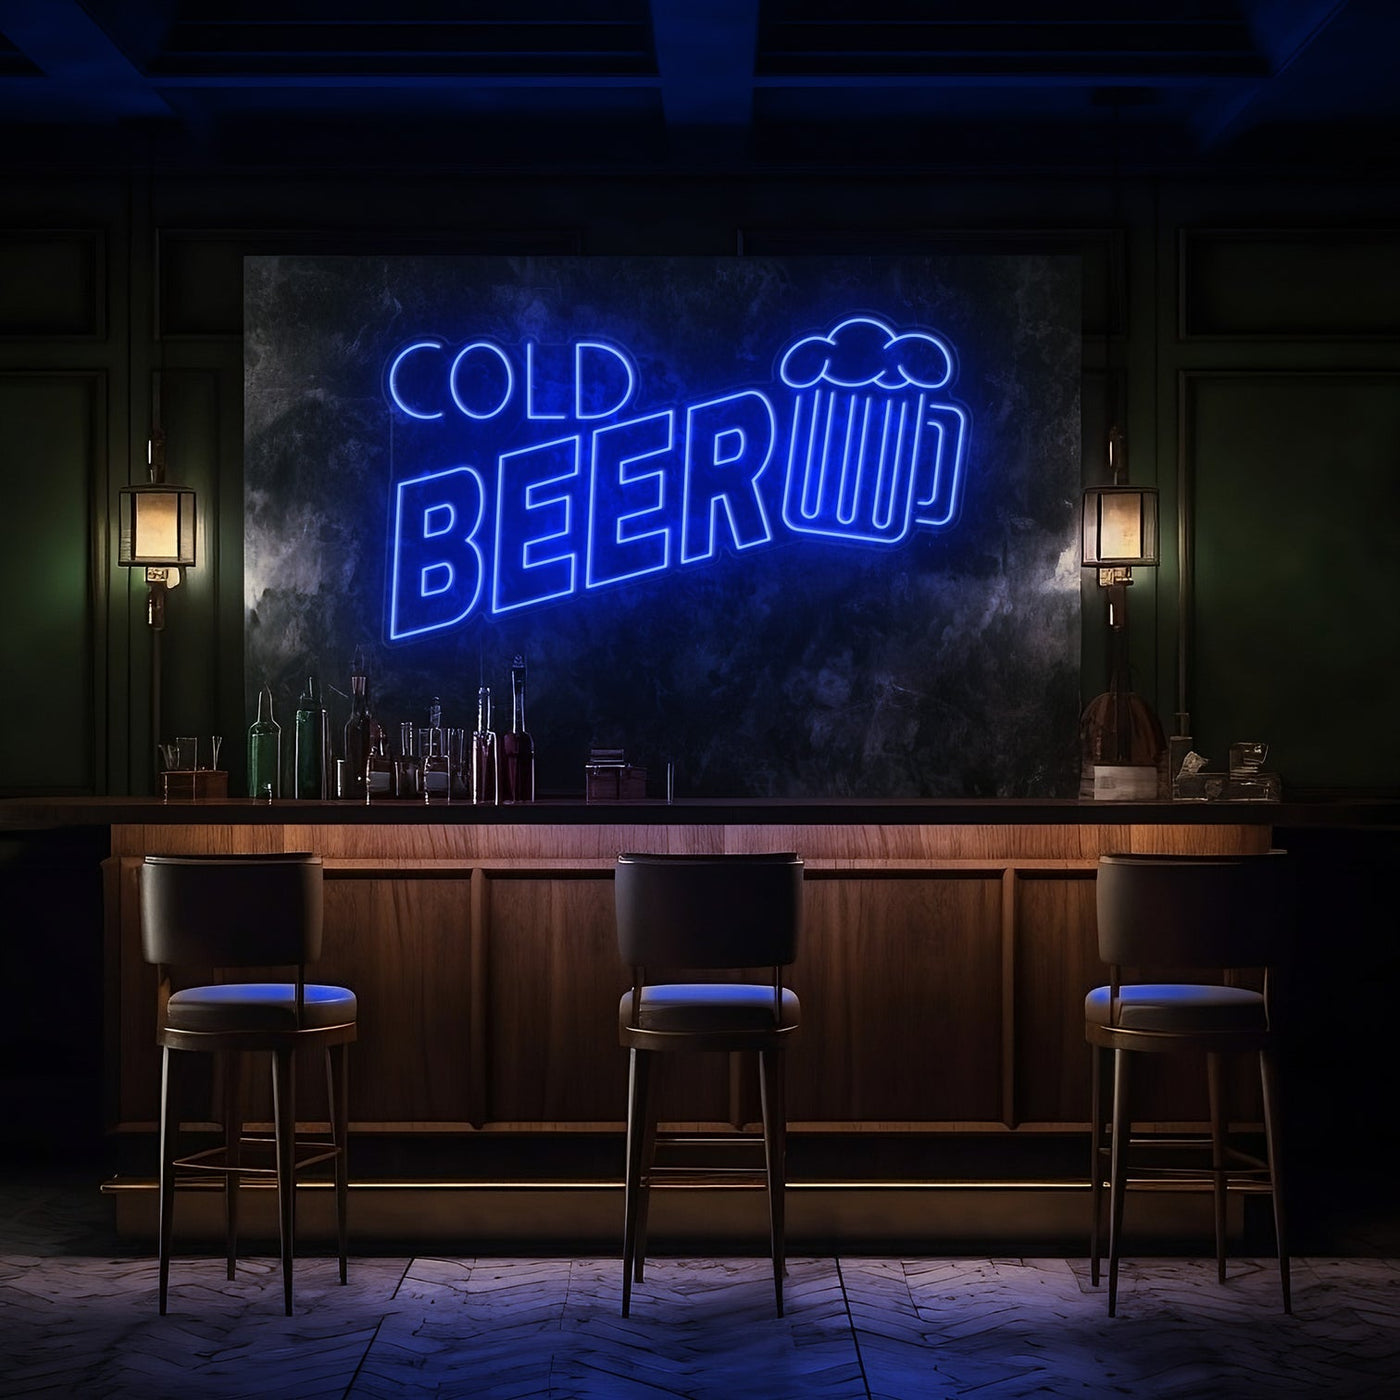 Cold Beer Bar LED Neon Sign - 30 InchDark Blue